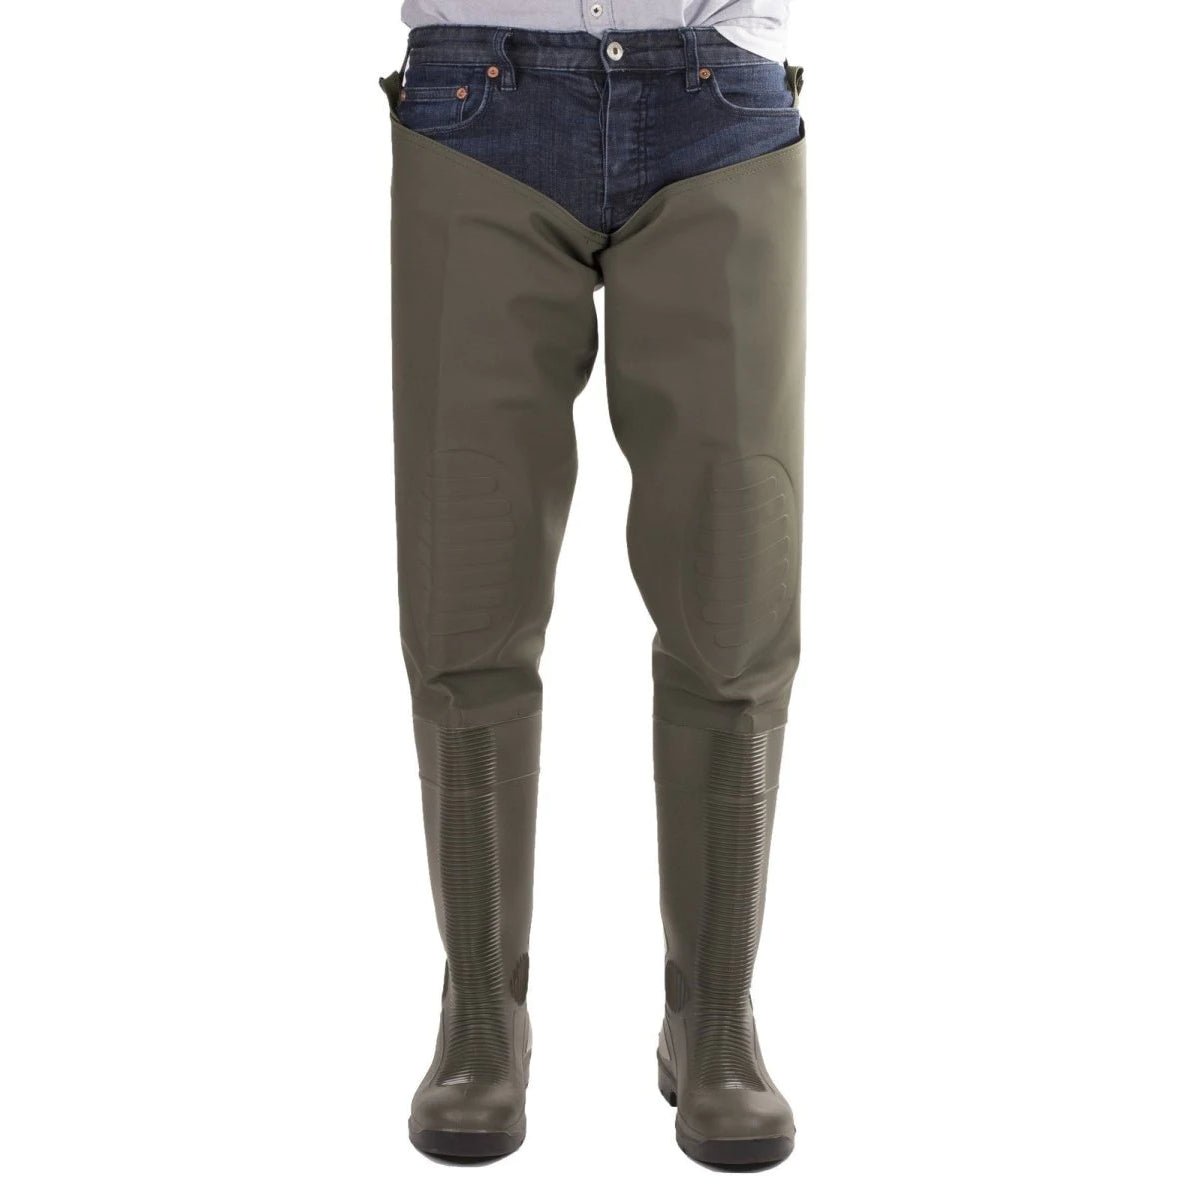 Amblers Forth Thigh Waterproof Safety Waders - Shoe Store Direct